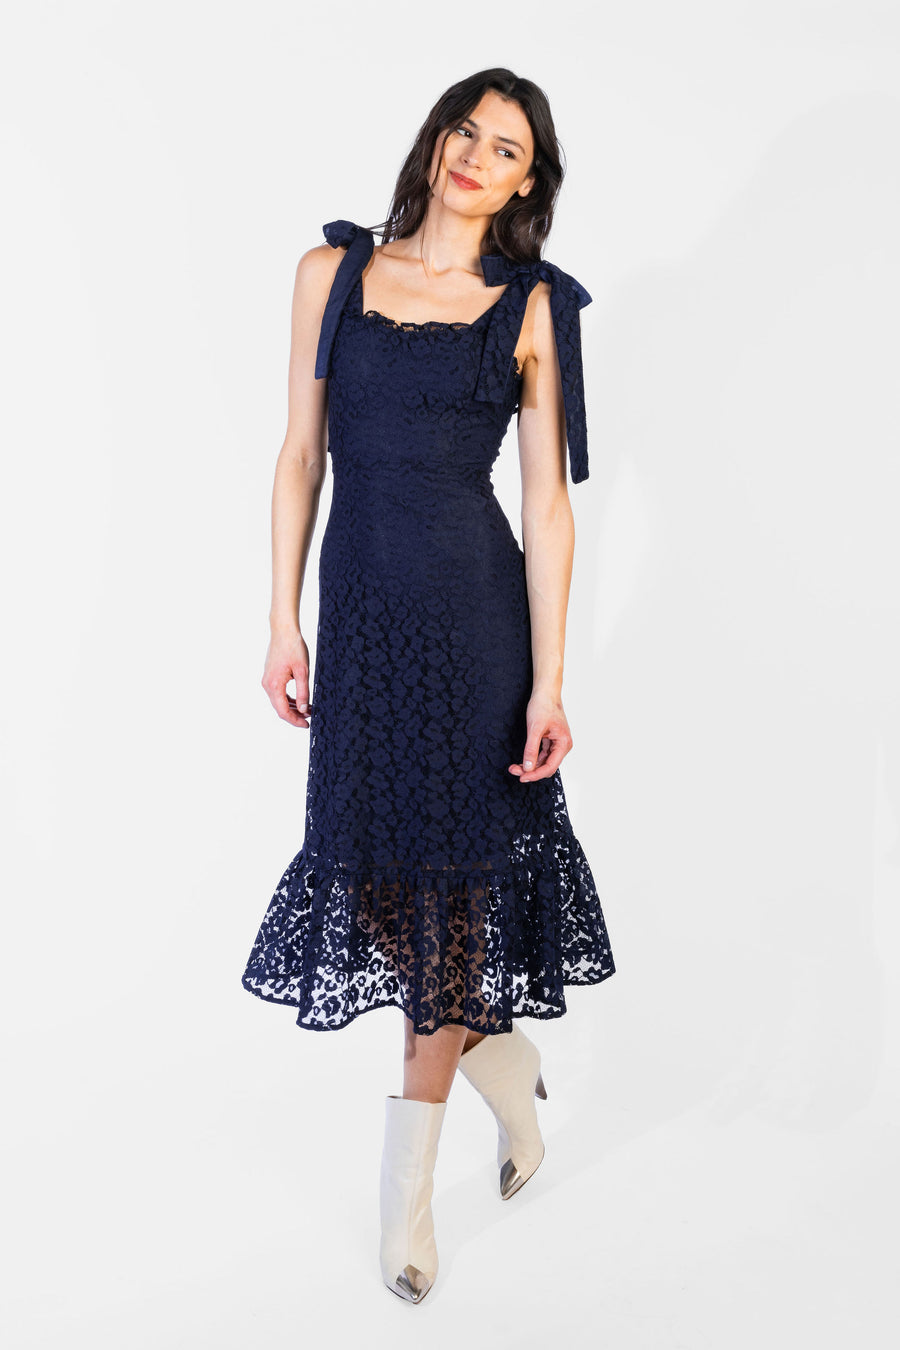 Meredith Dress Midnight Lace *Limited*Edition*